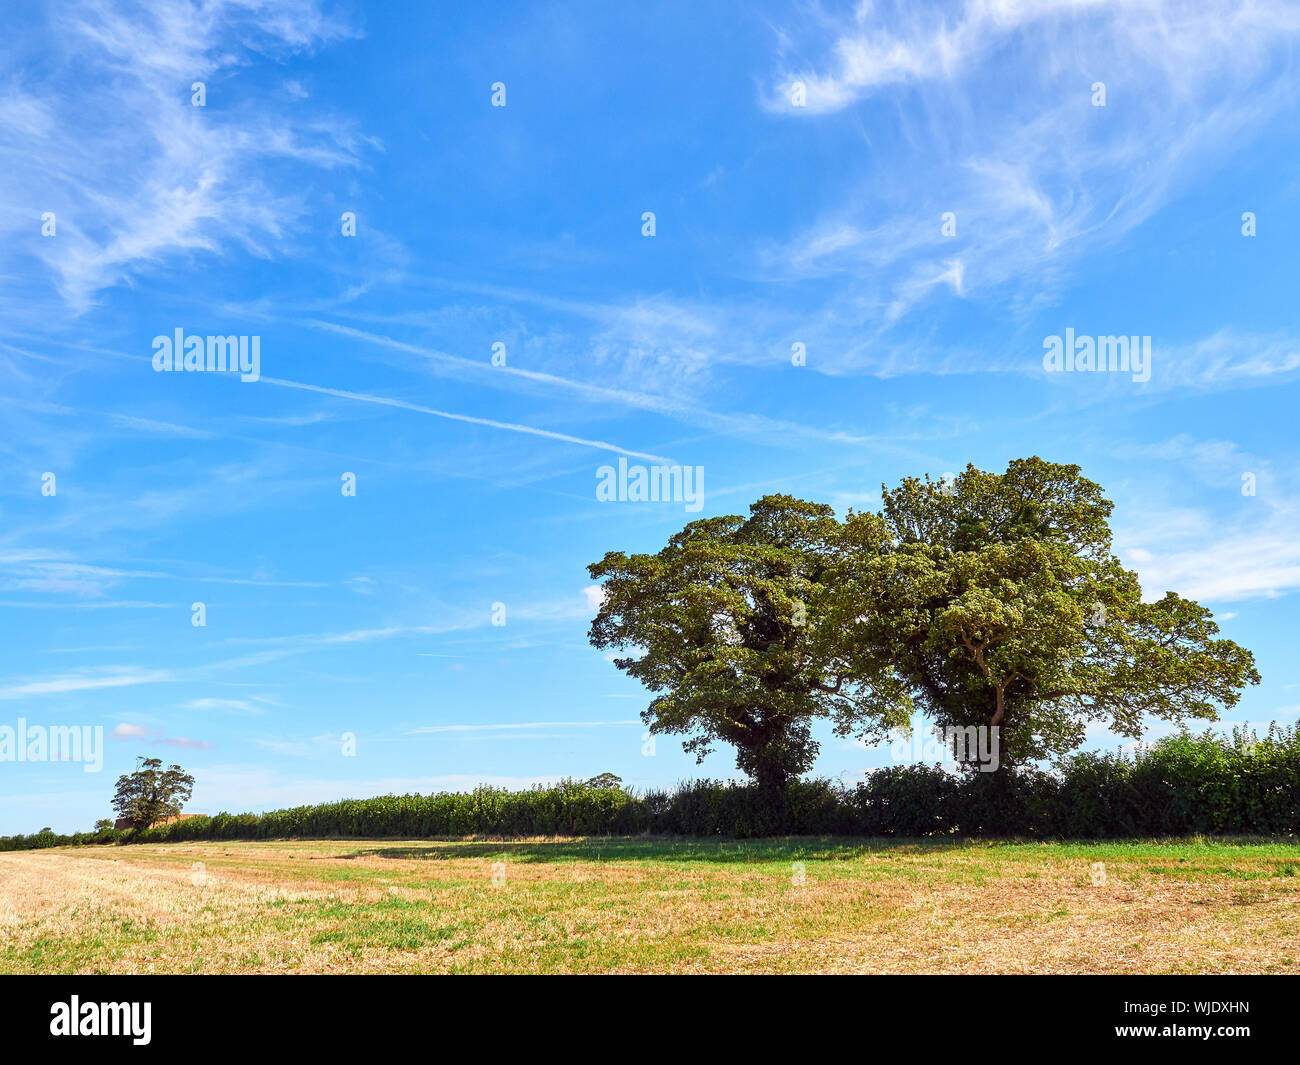 Contrails and white wispy clouds against a vibrant blue summers sky with an arable stubble field and sycamore trees in the foreground Stock Photo